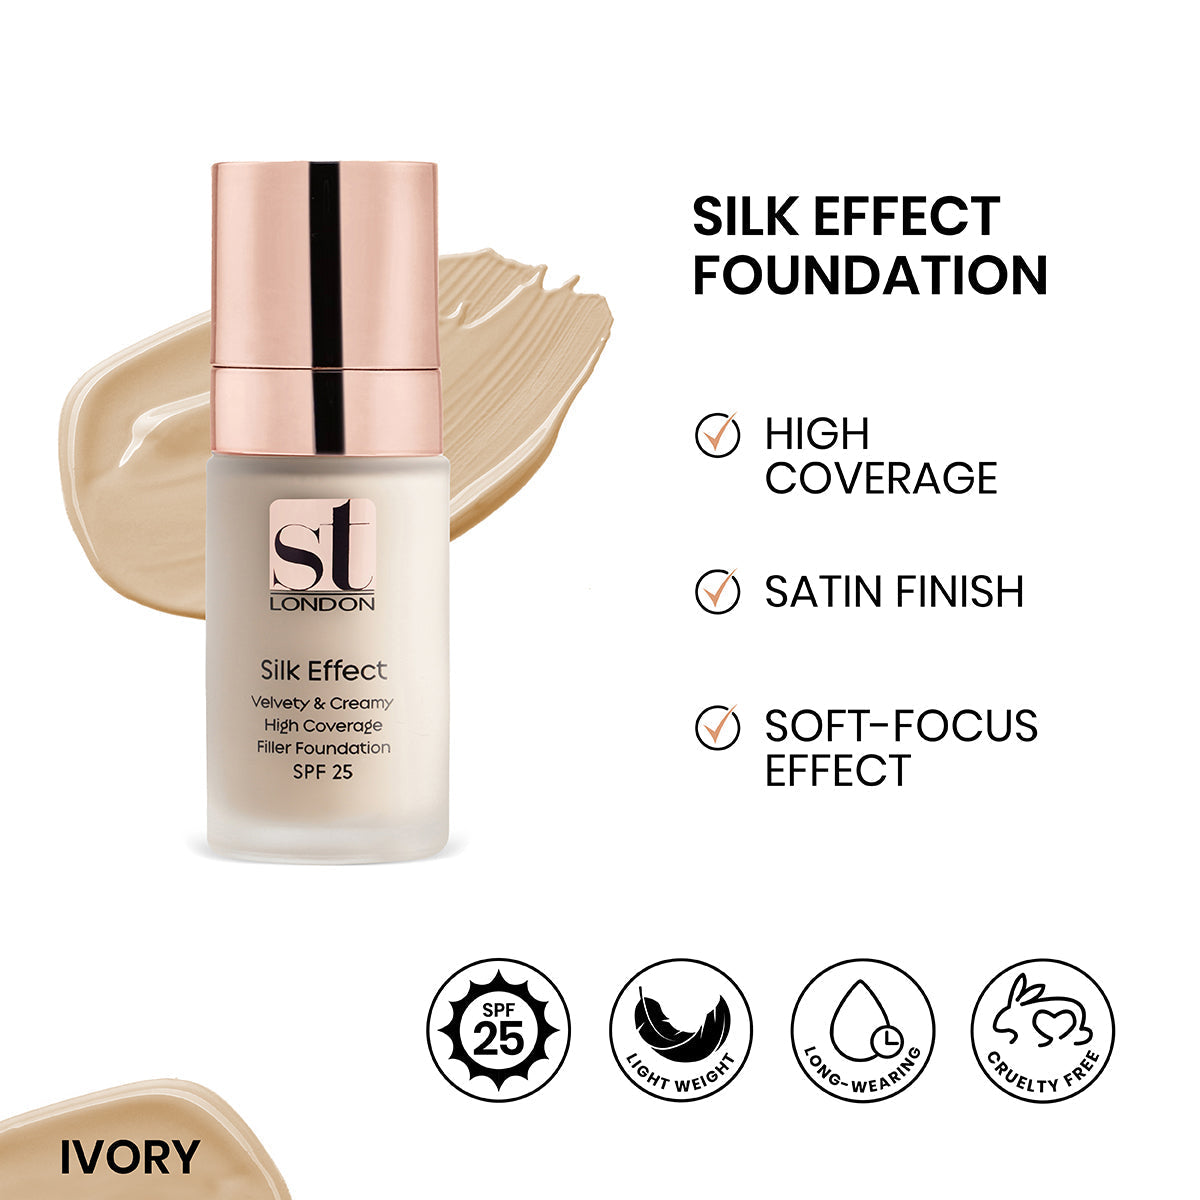 Buy  ST London Silk Effect Foundation - Ivory at Best Price Online in Pakistan